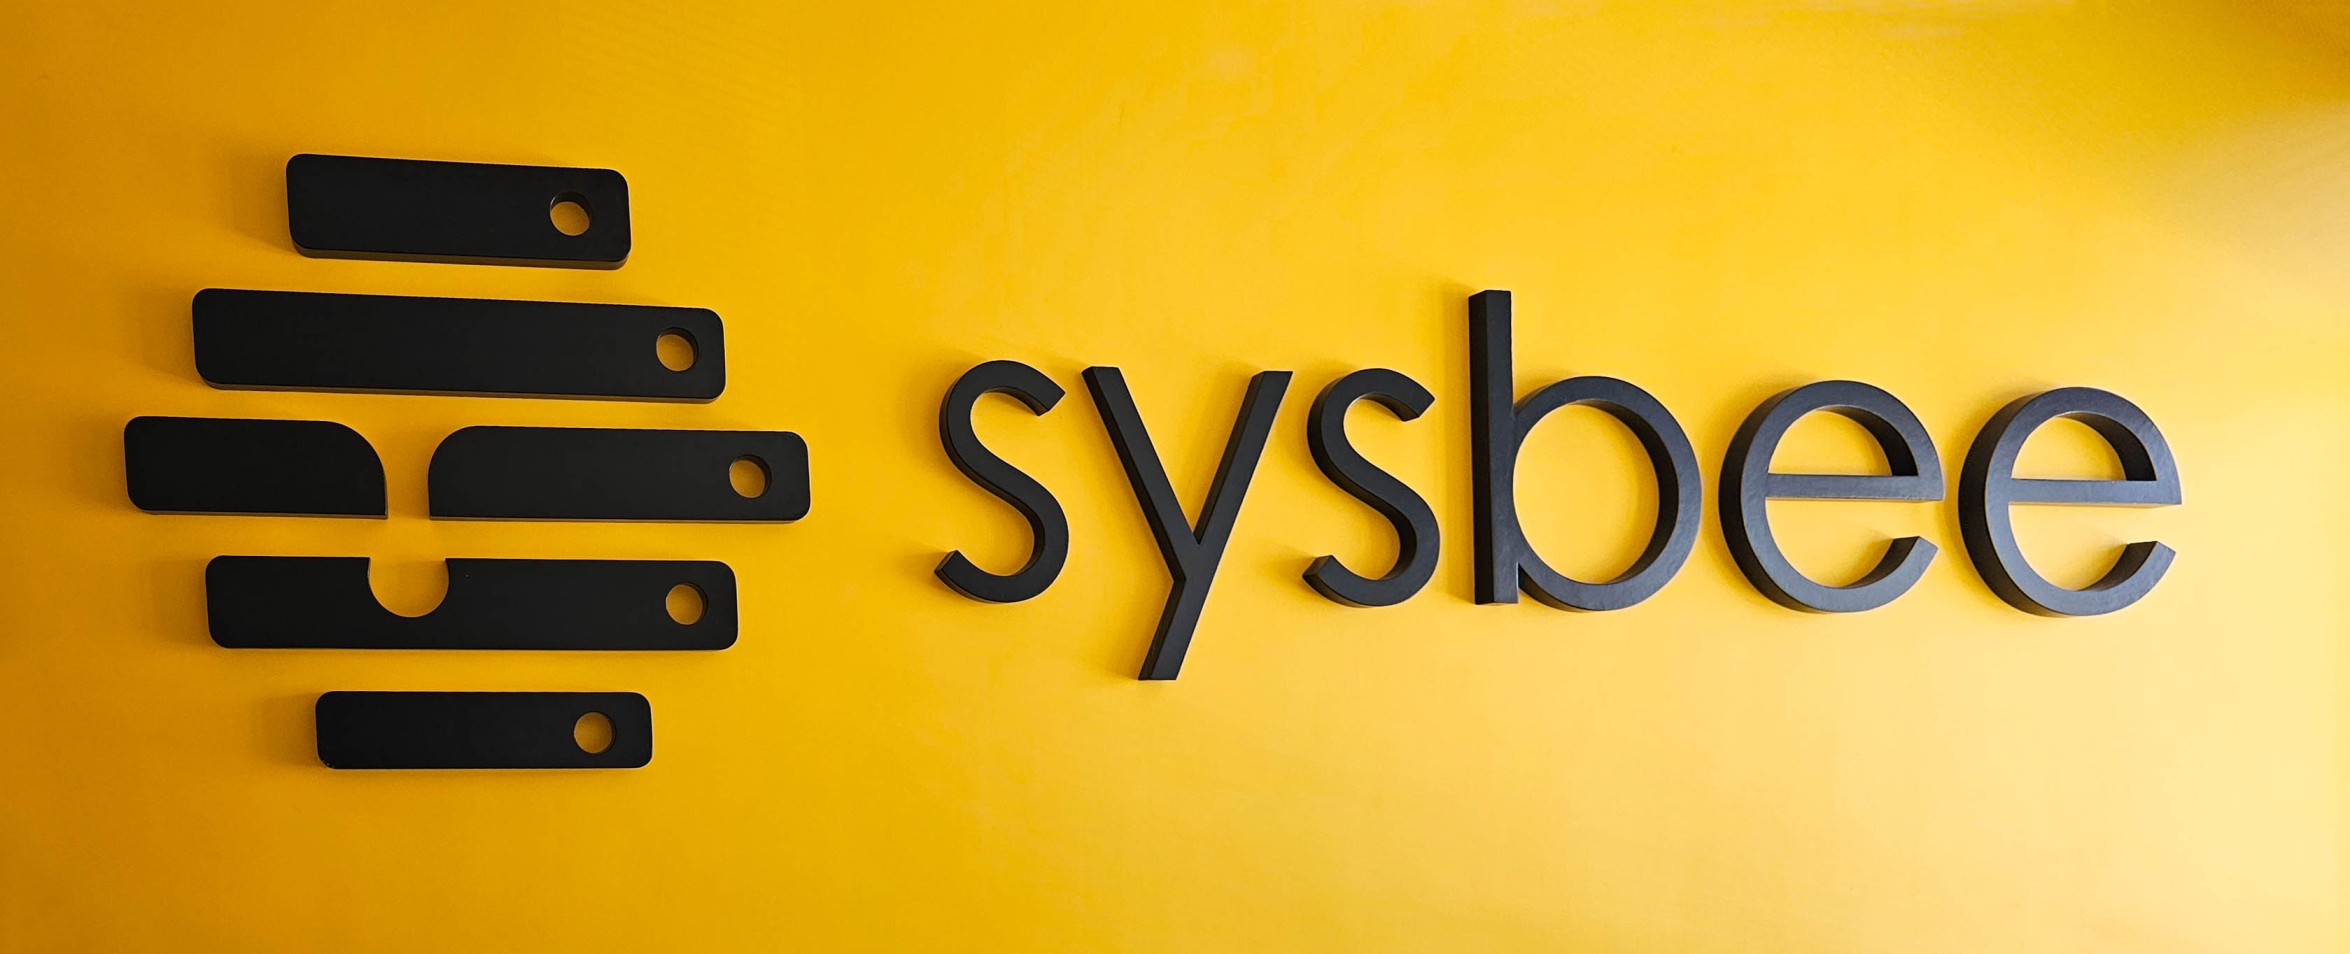 Sysbee - celebrating the 5th anniversary